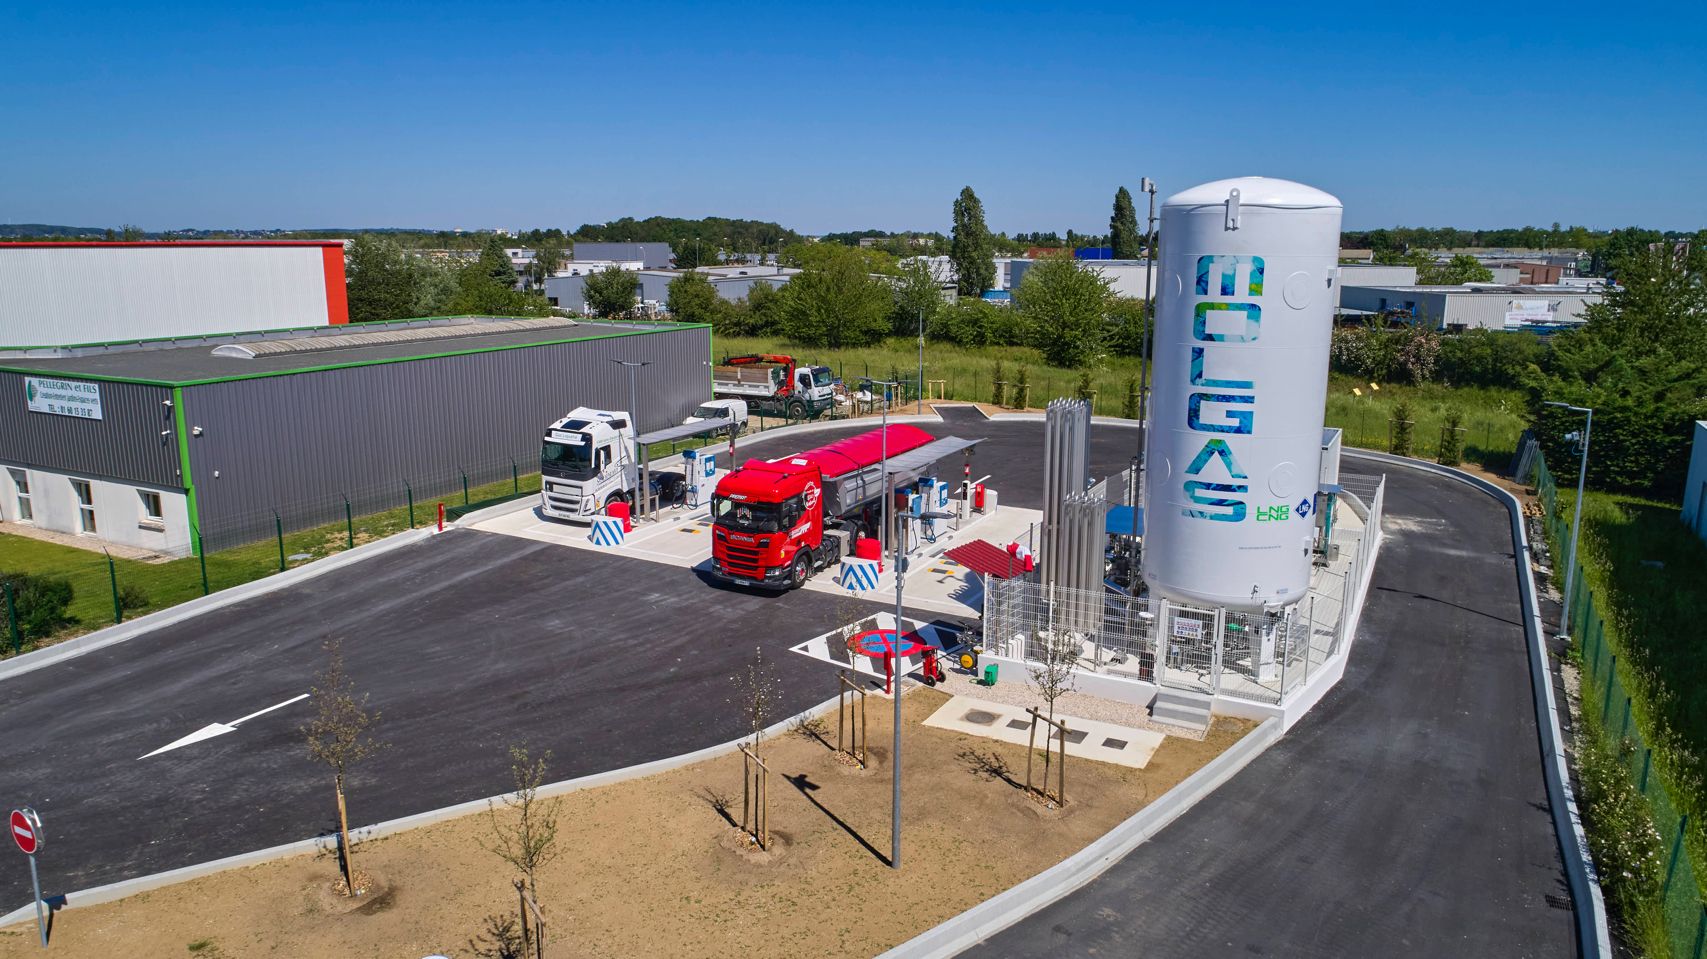 Molgas, Wolftank to build European LNG and hydrogen refueling stations